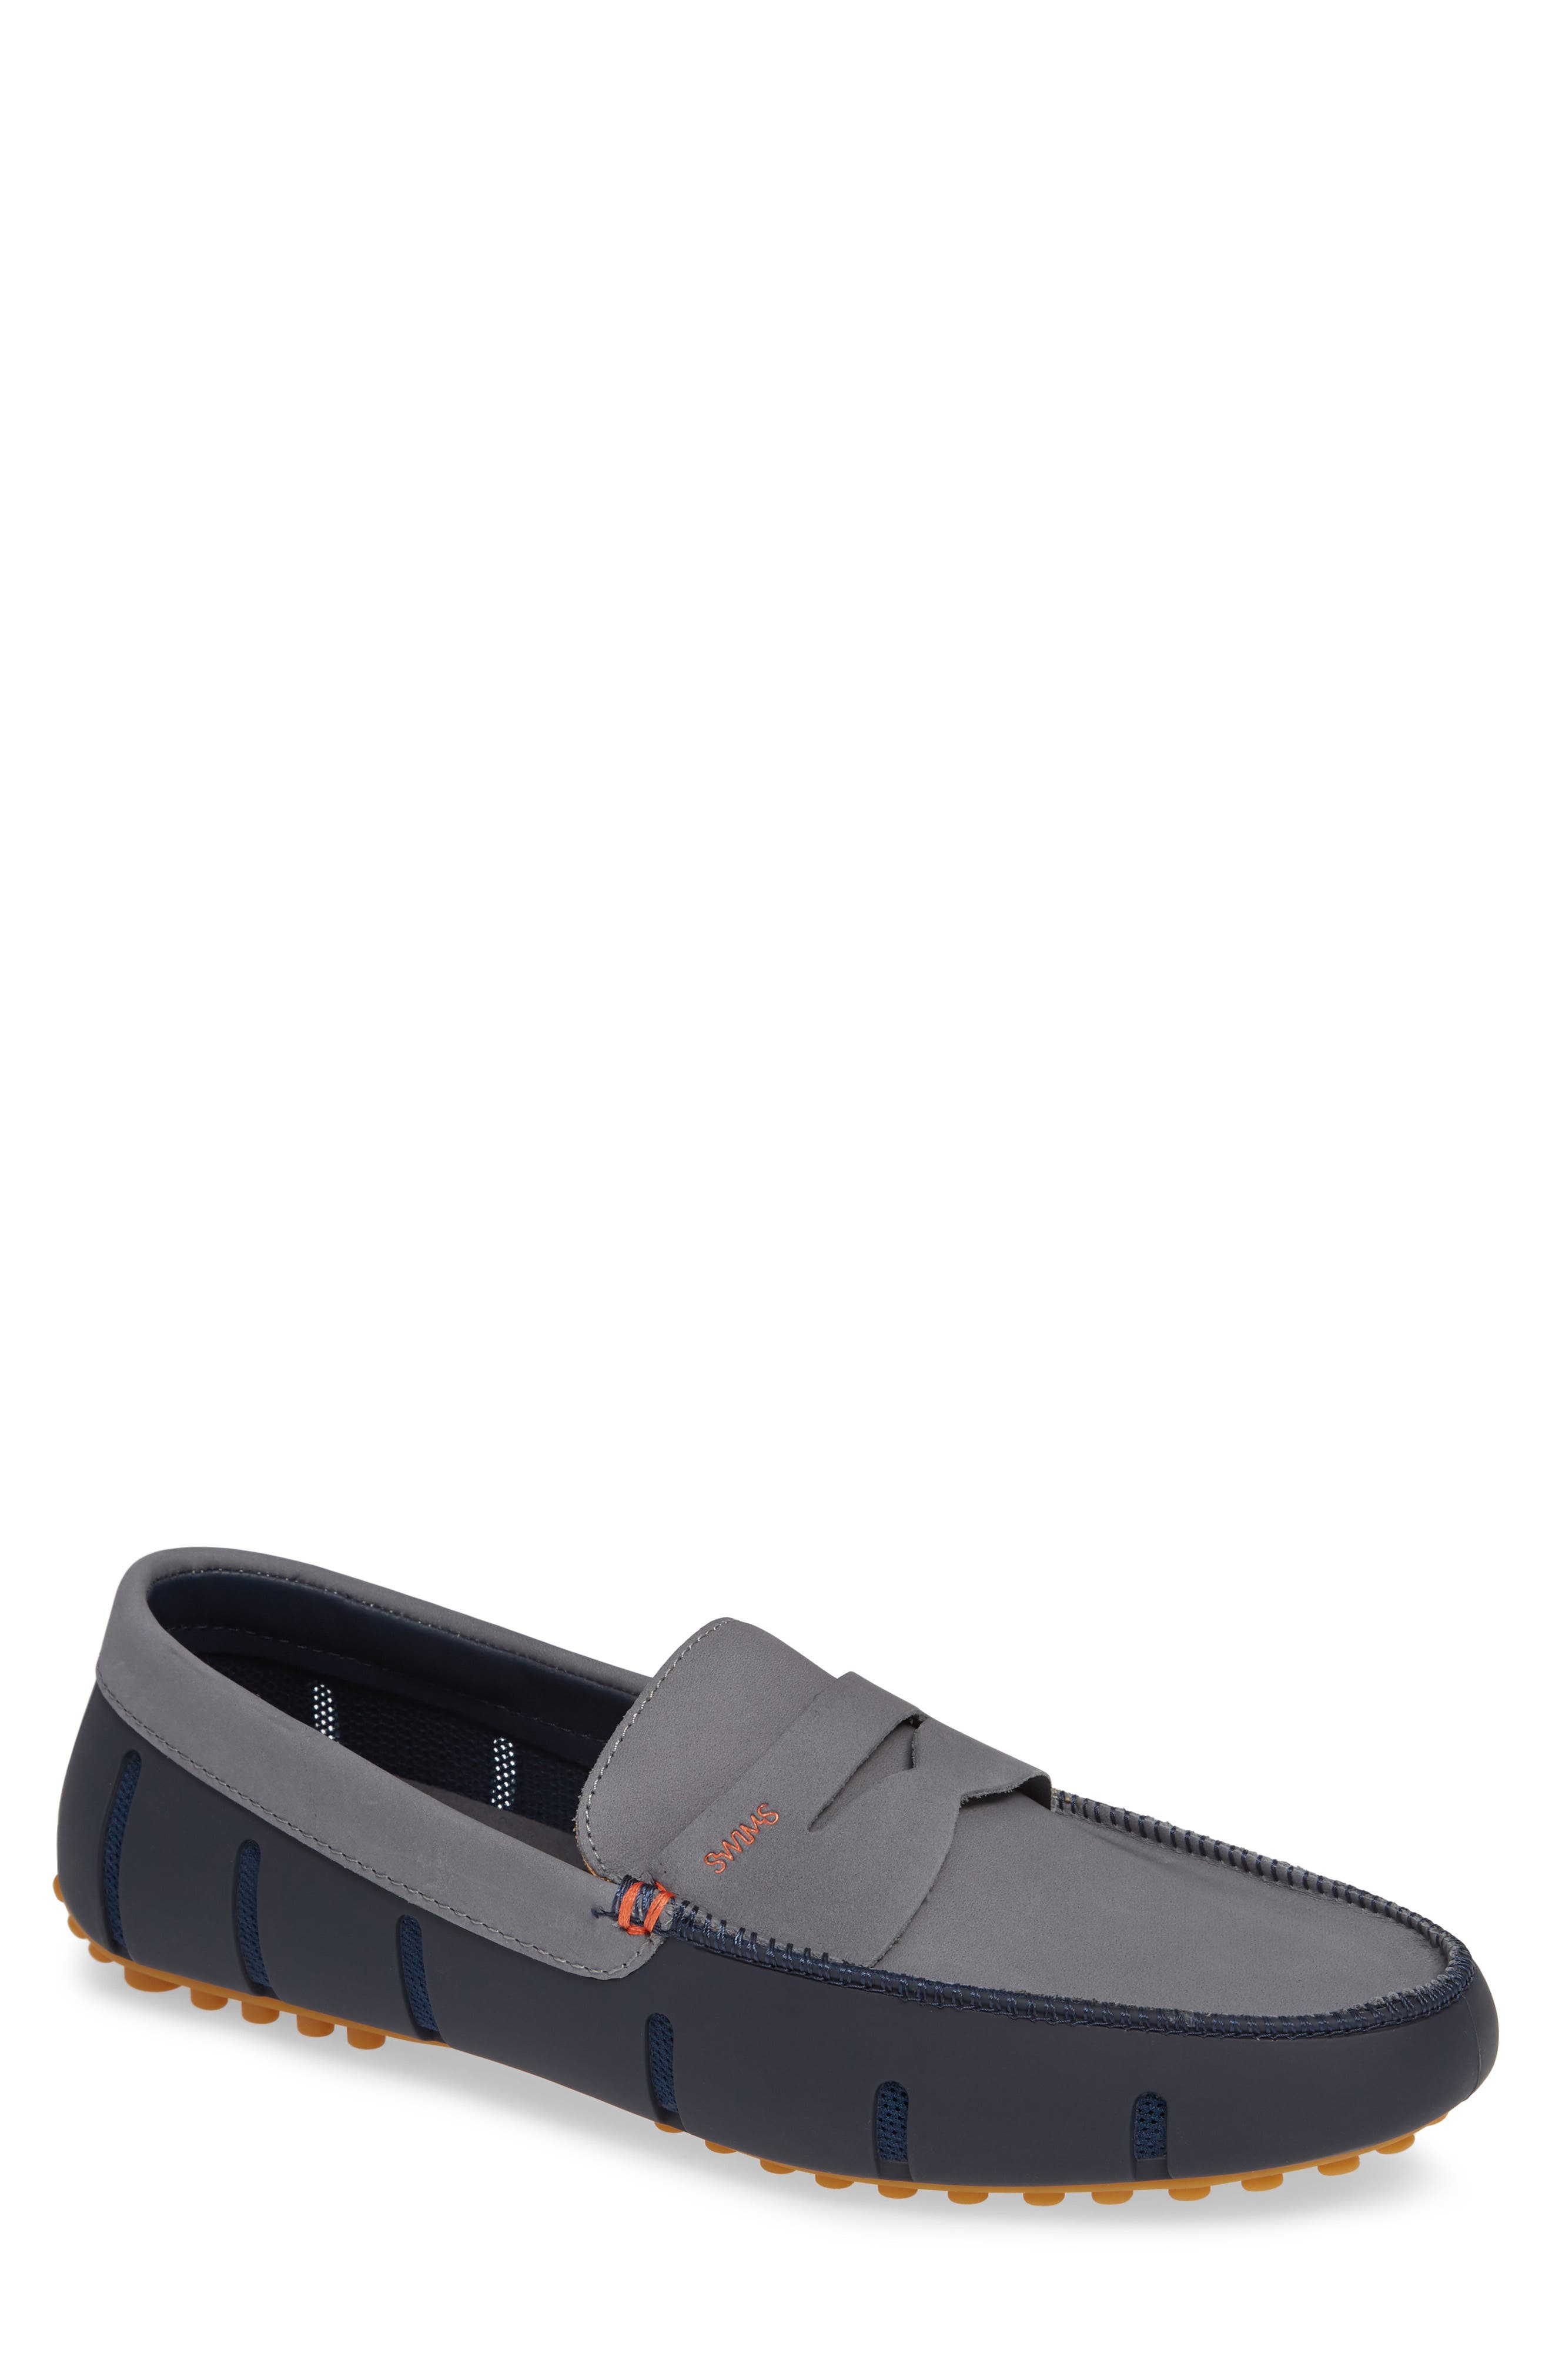 swims penny loafer sale